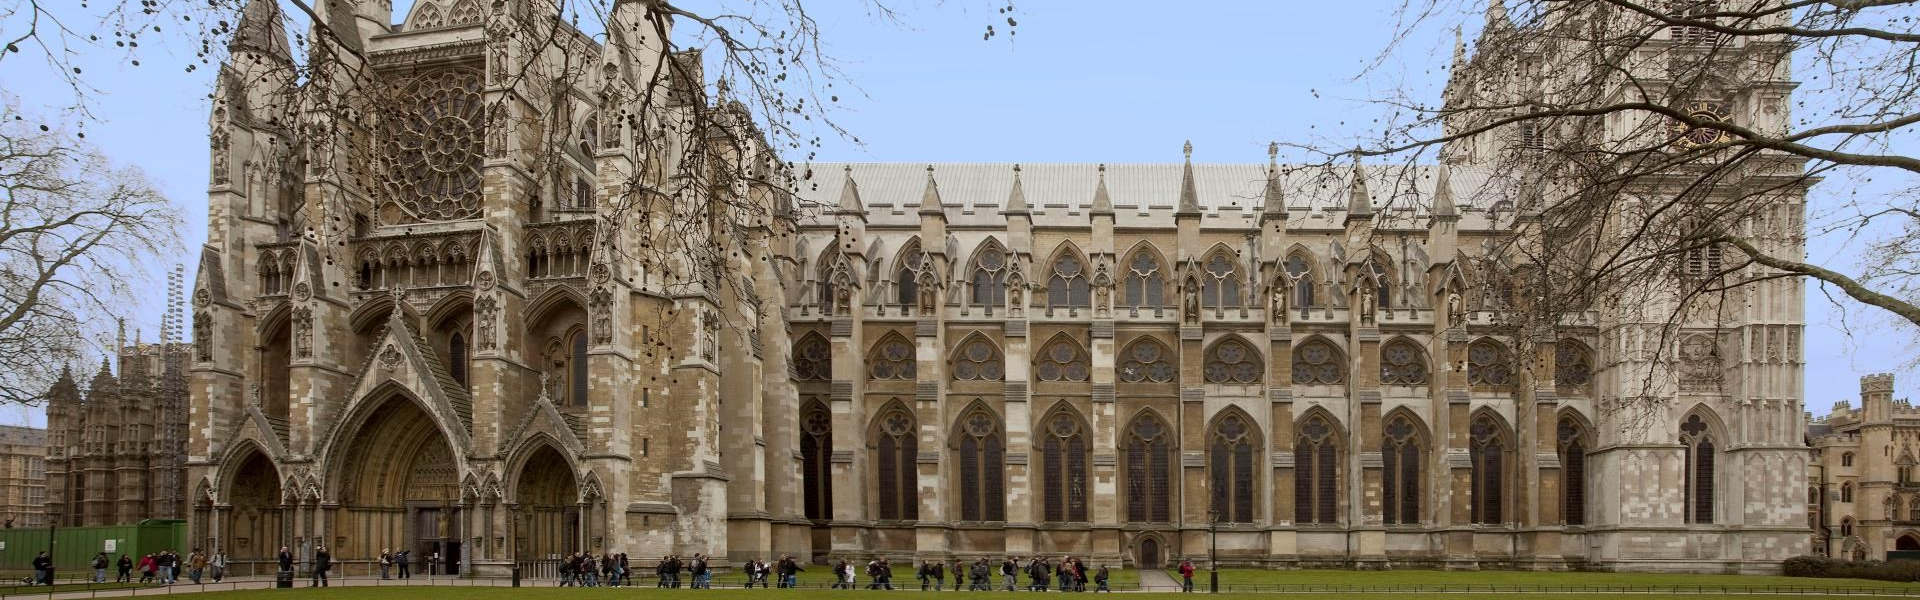 Year of Engineering service at Westminster Abbey